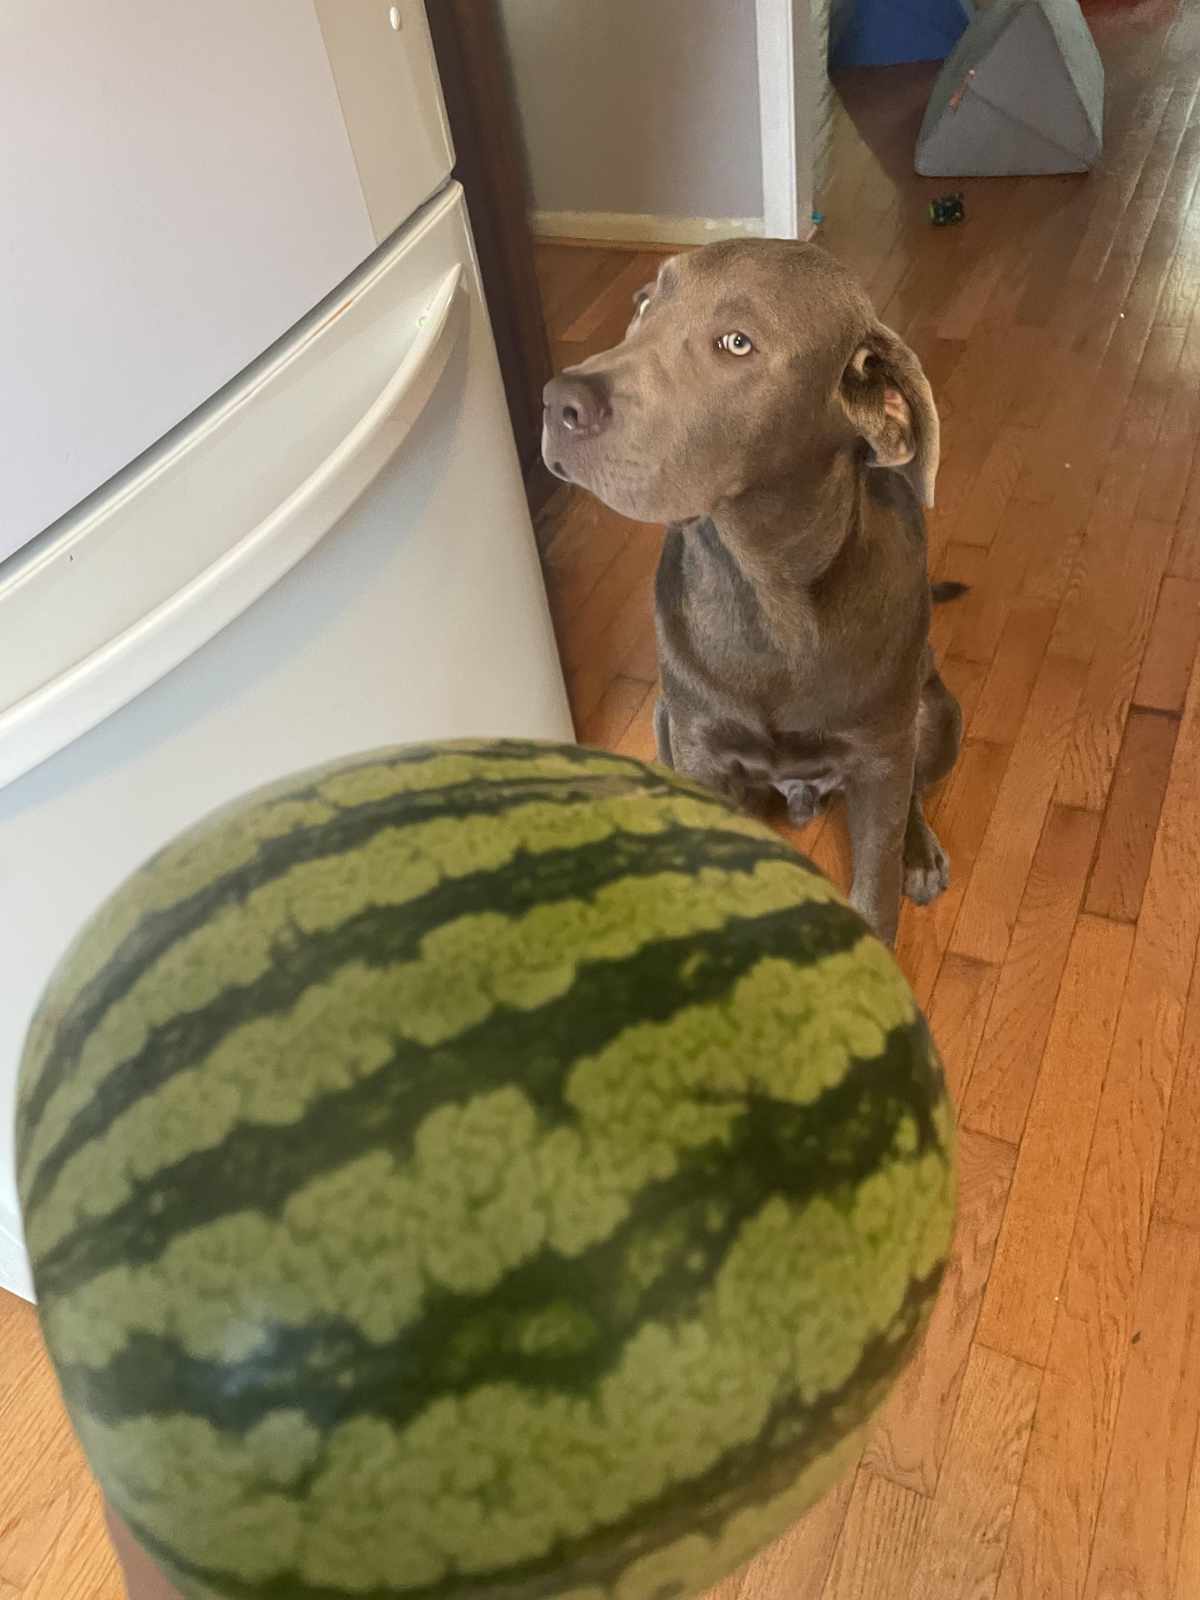 My dog is afraid of this watermelon